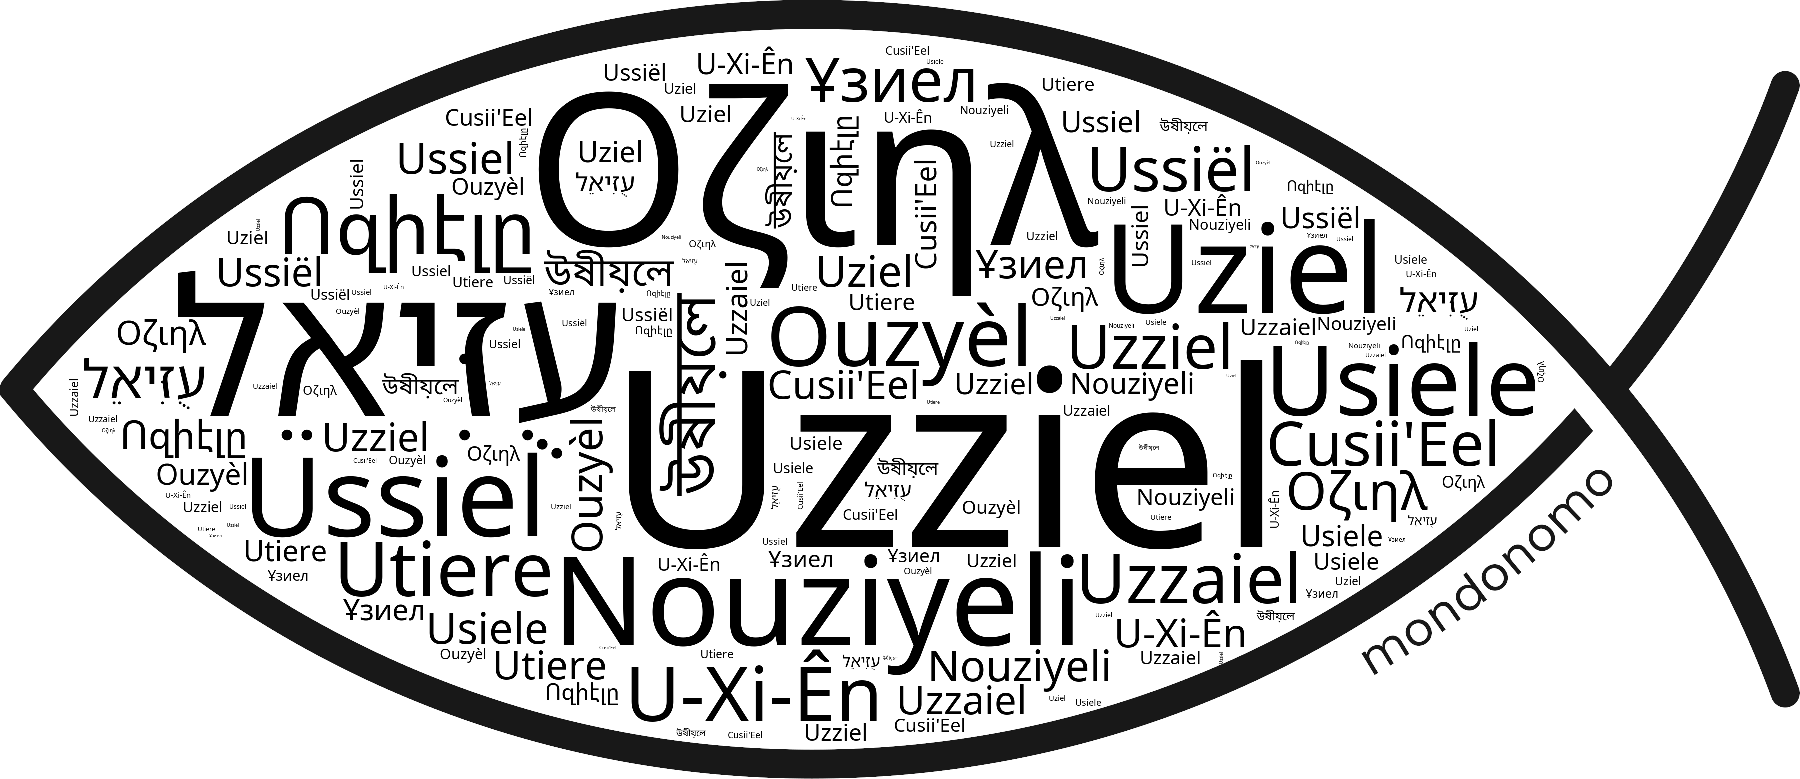 Name Uzziel in the world's Bibles